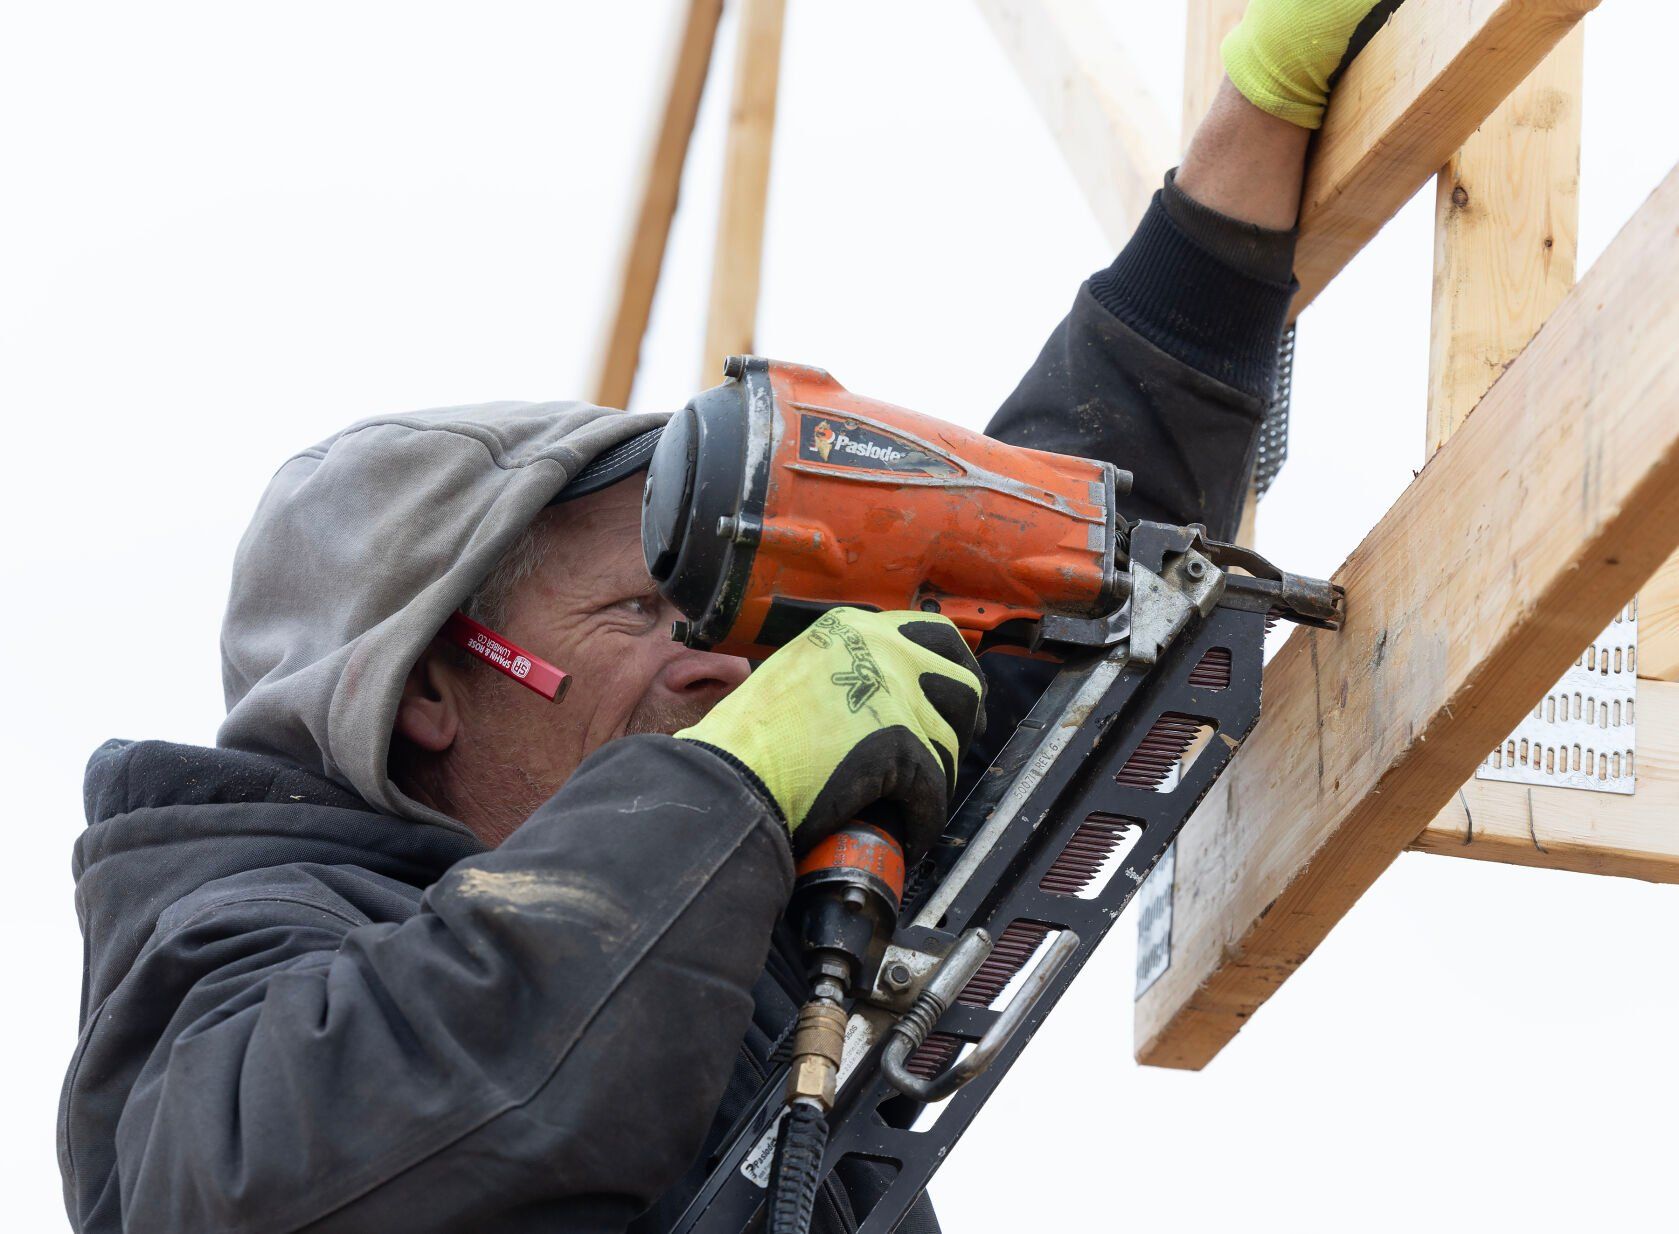 Chad Erner, with Carpenters Construction Services Inc., works on the home.    PHOTO CREDIT: Stephen Gassman
Telegraph Herald